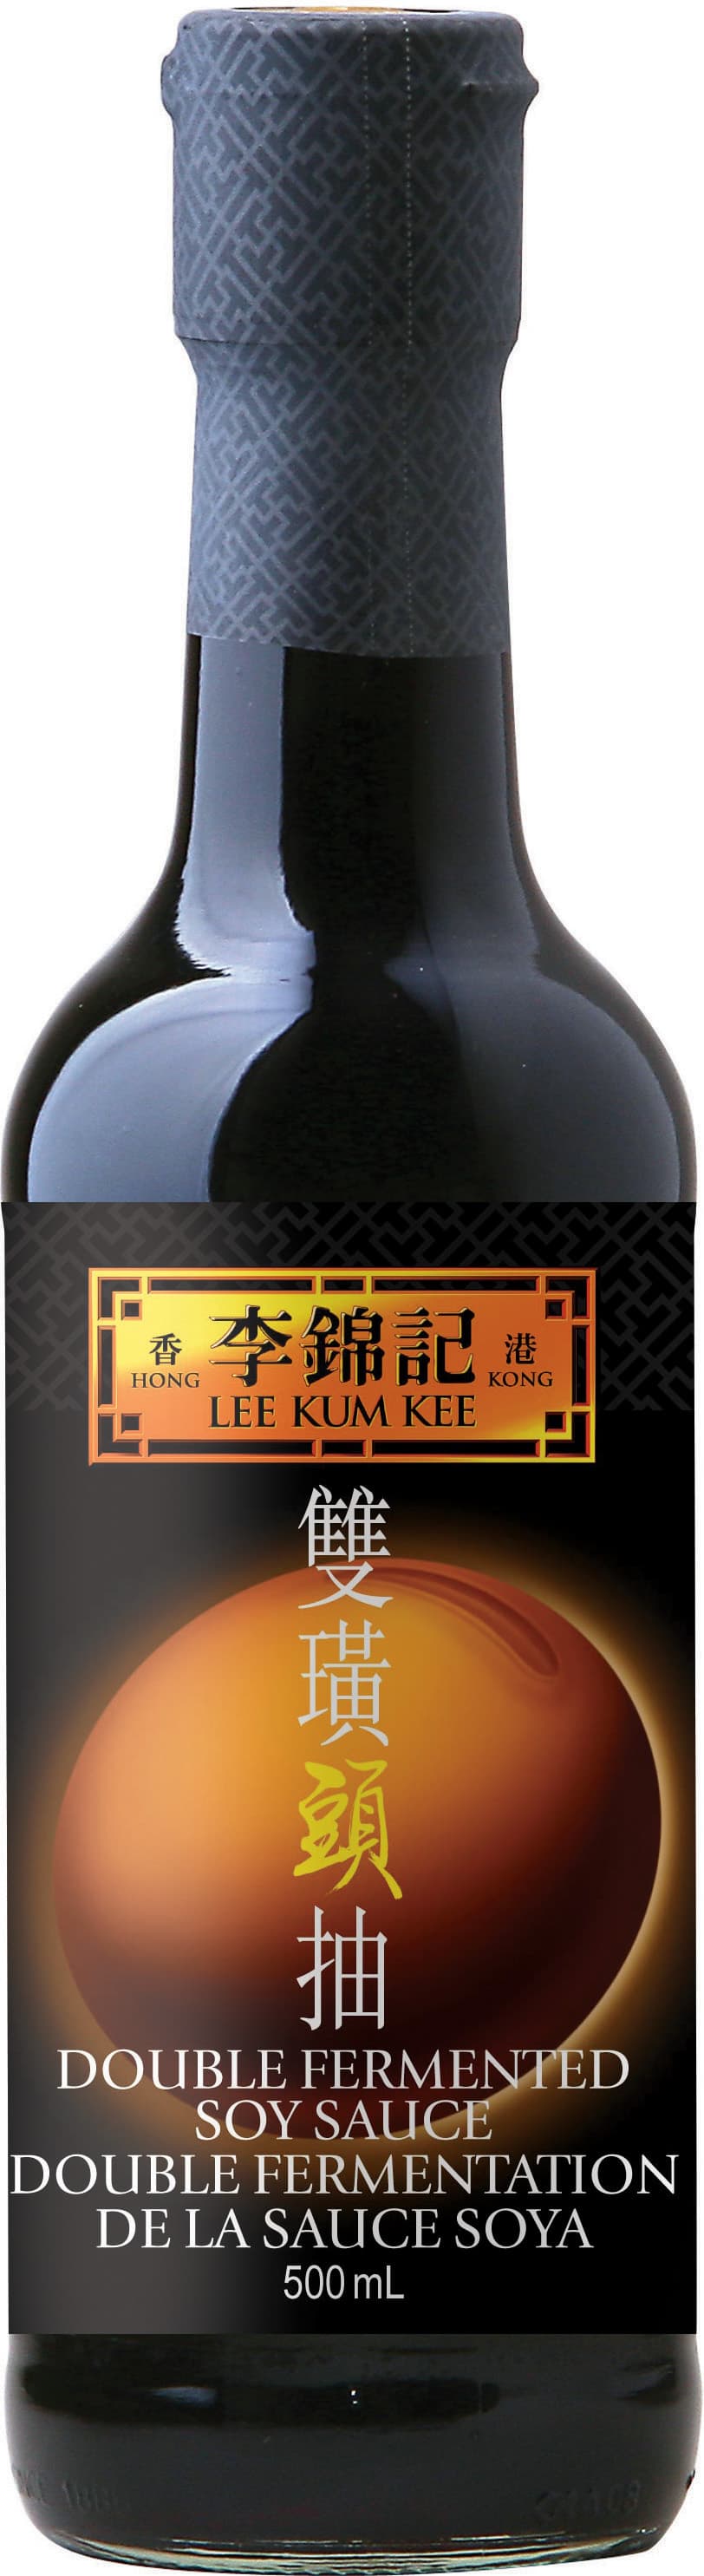 Double Fermented Soy Sauce 500ml 